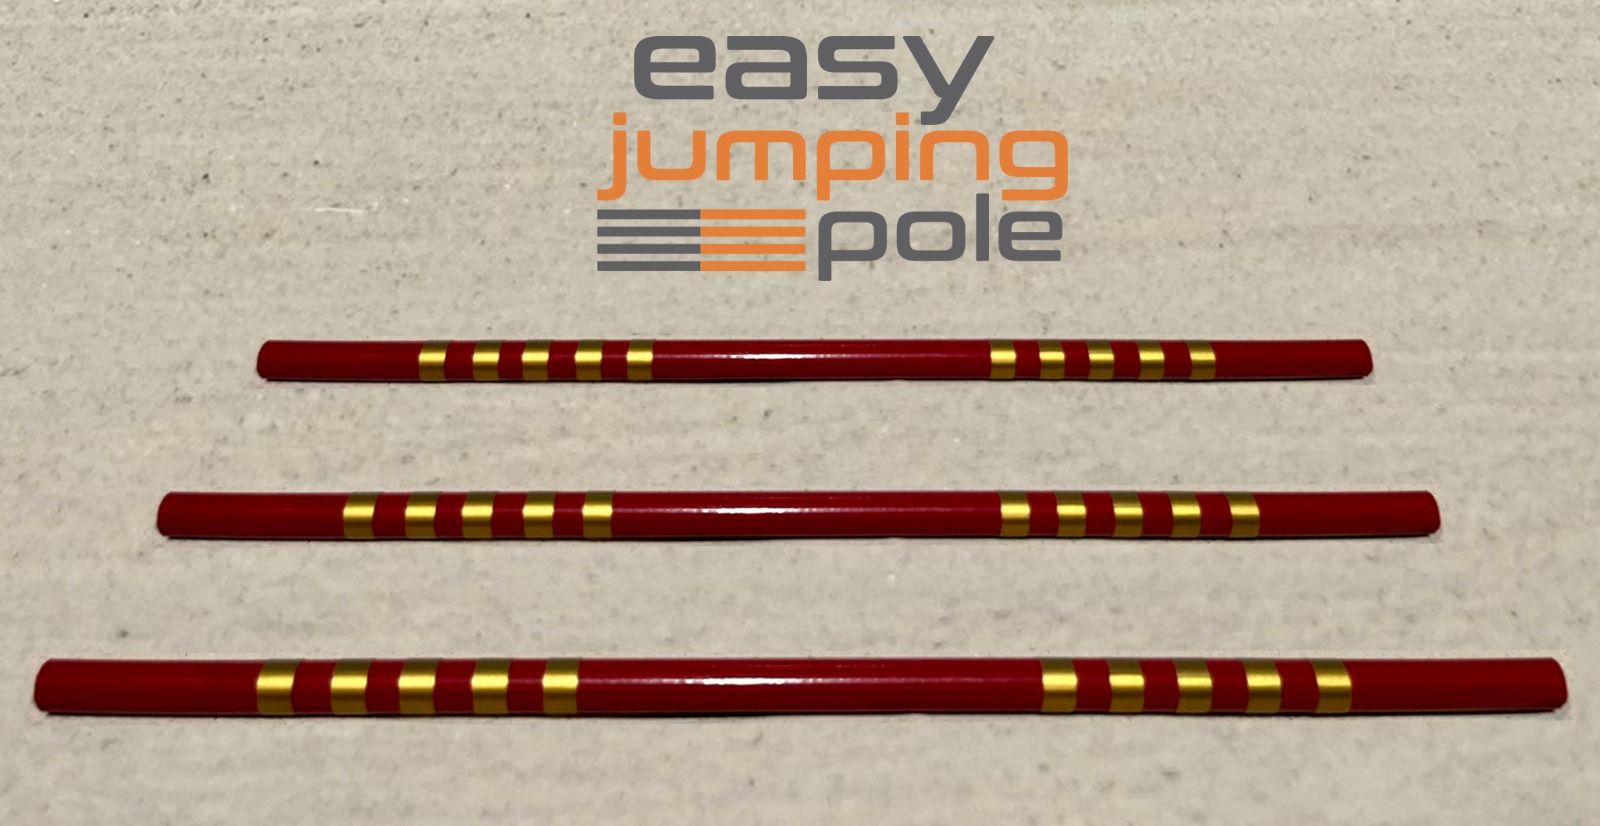 Easy jumping pole Model D-2